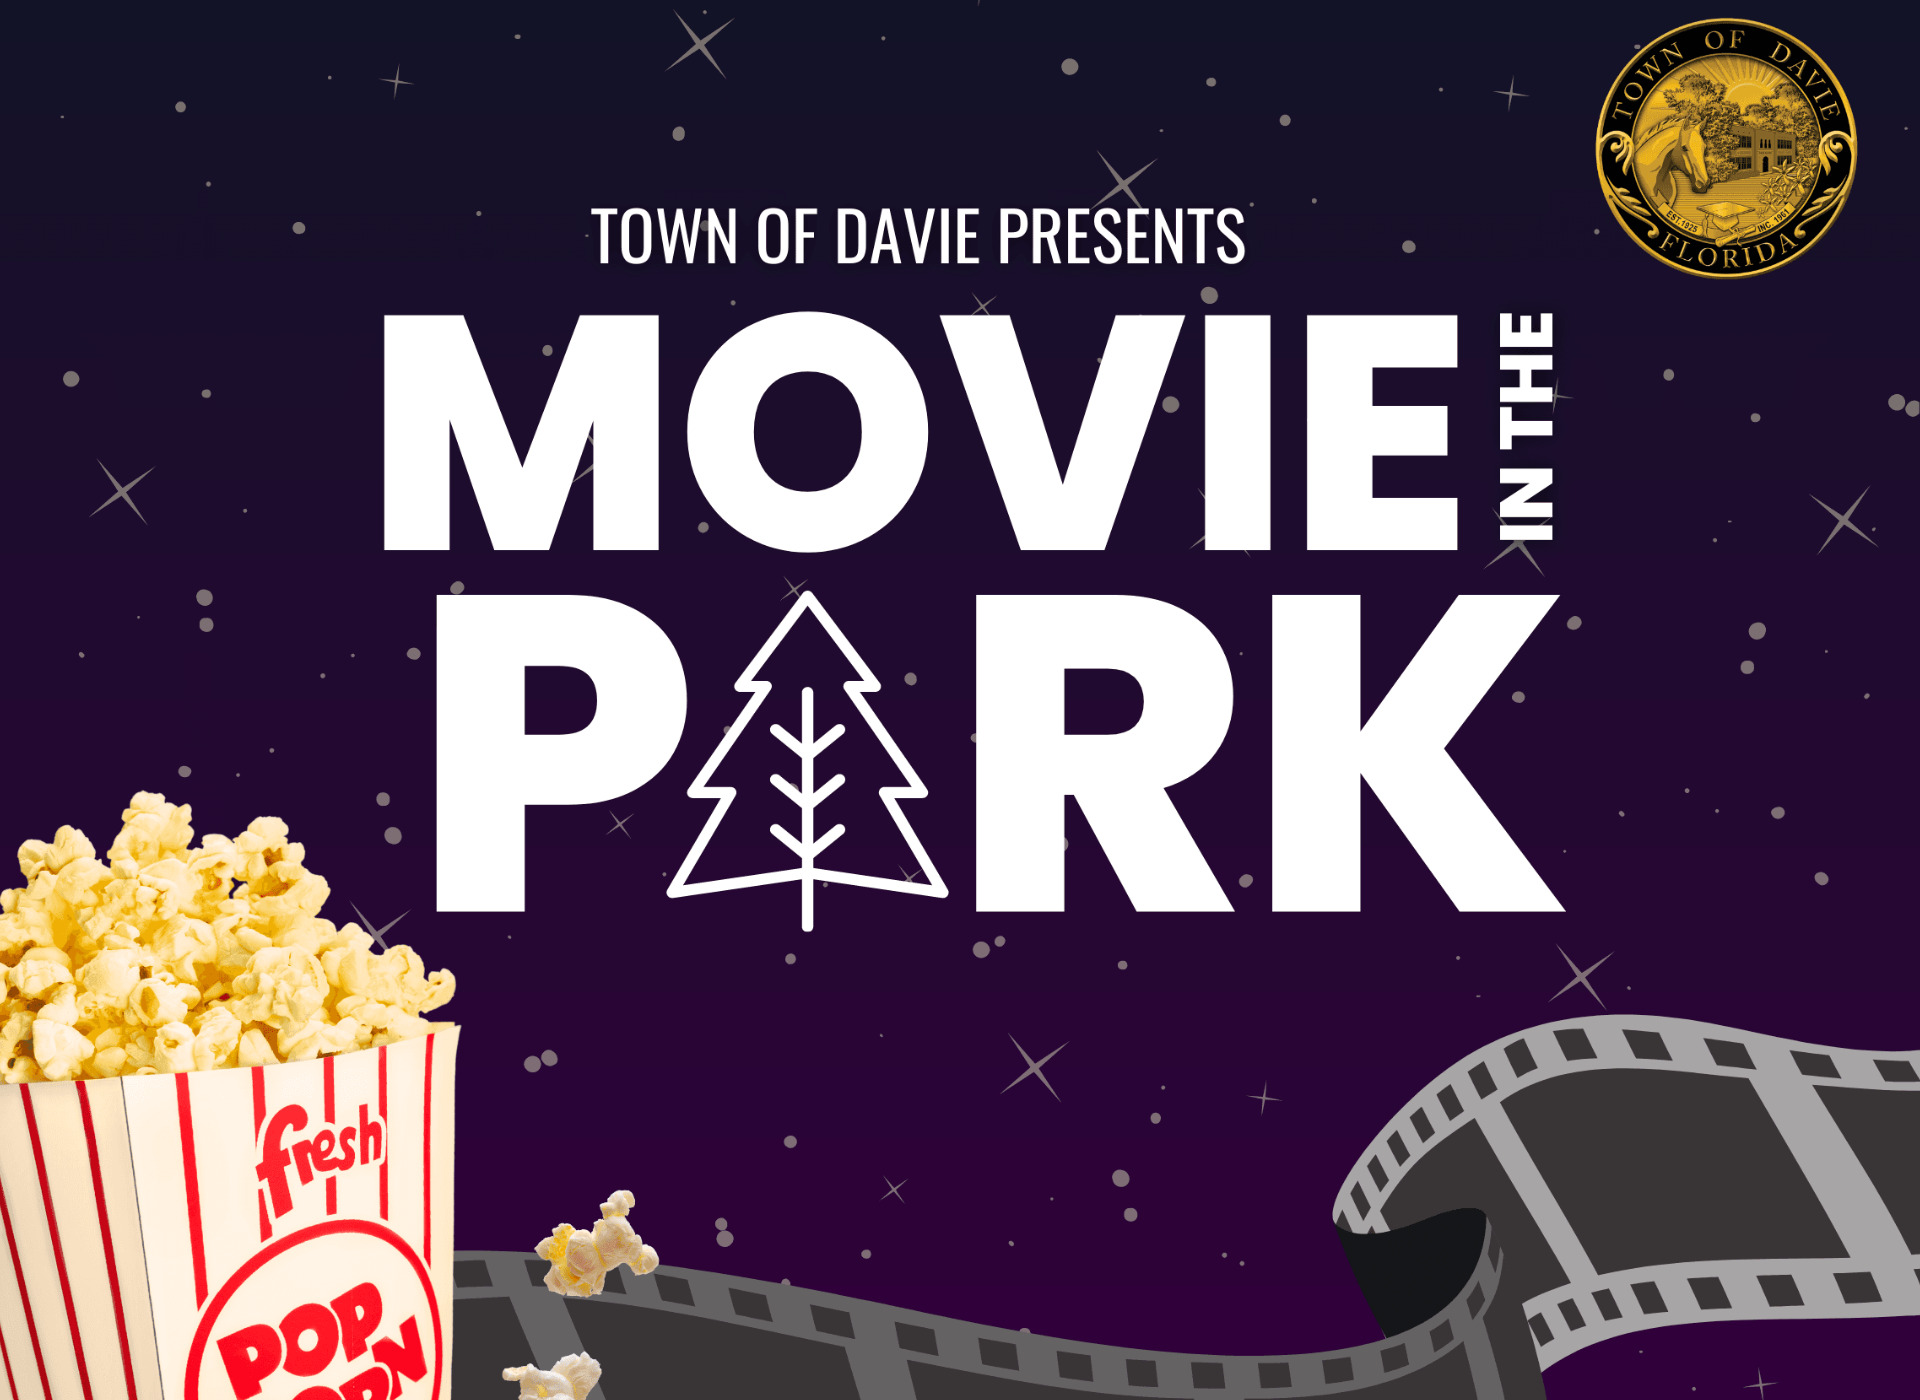 Town of Davie - Movies in the Park